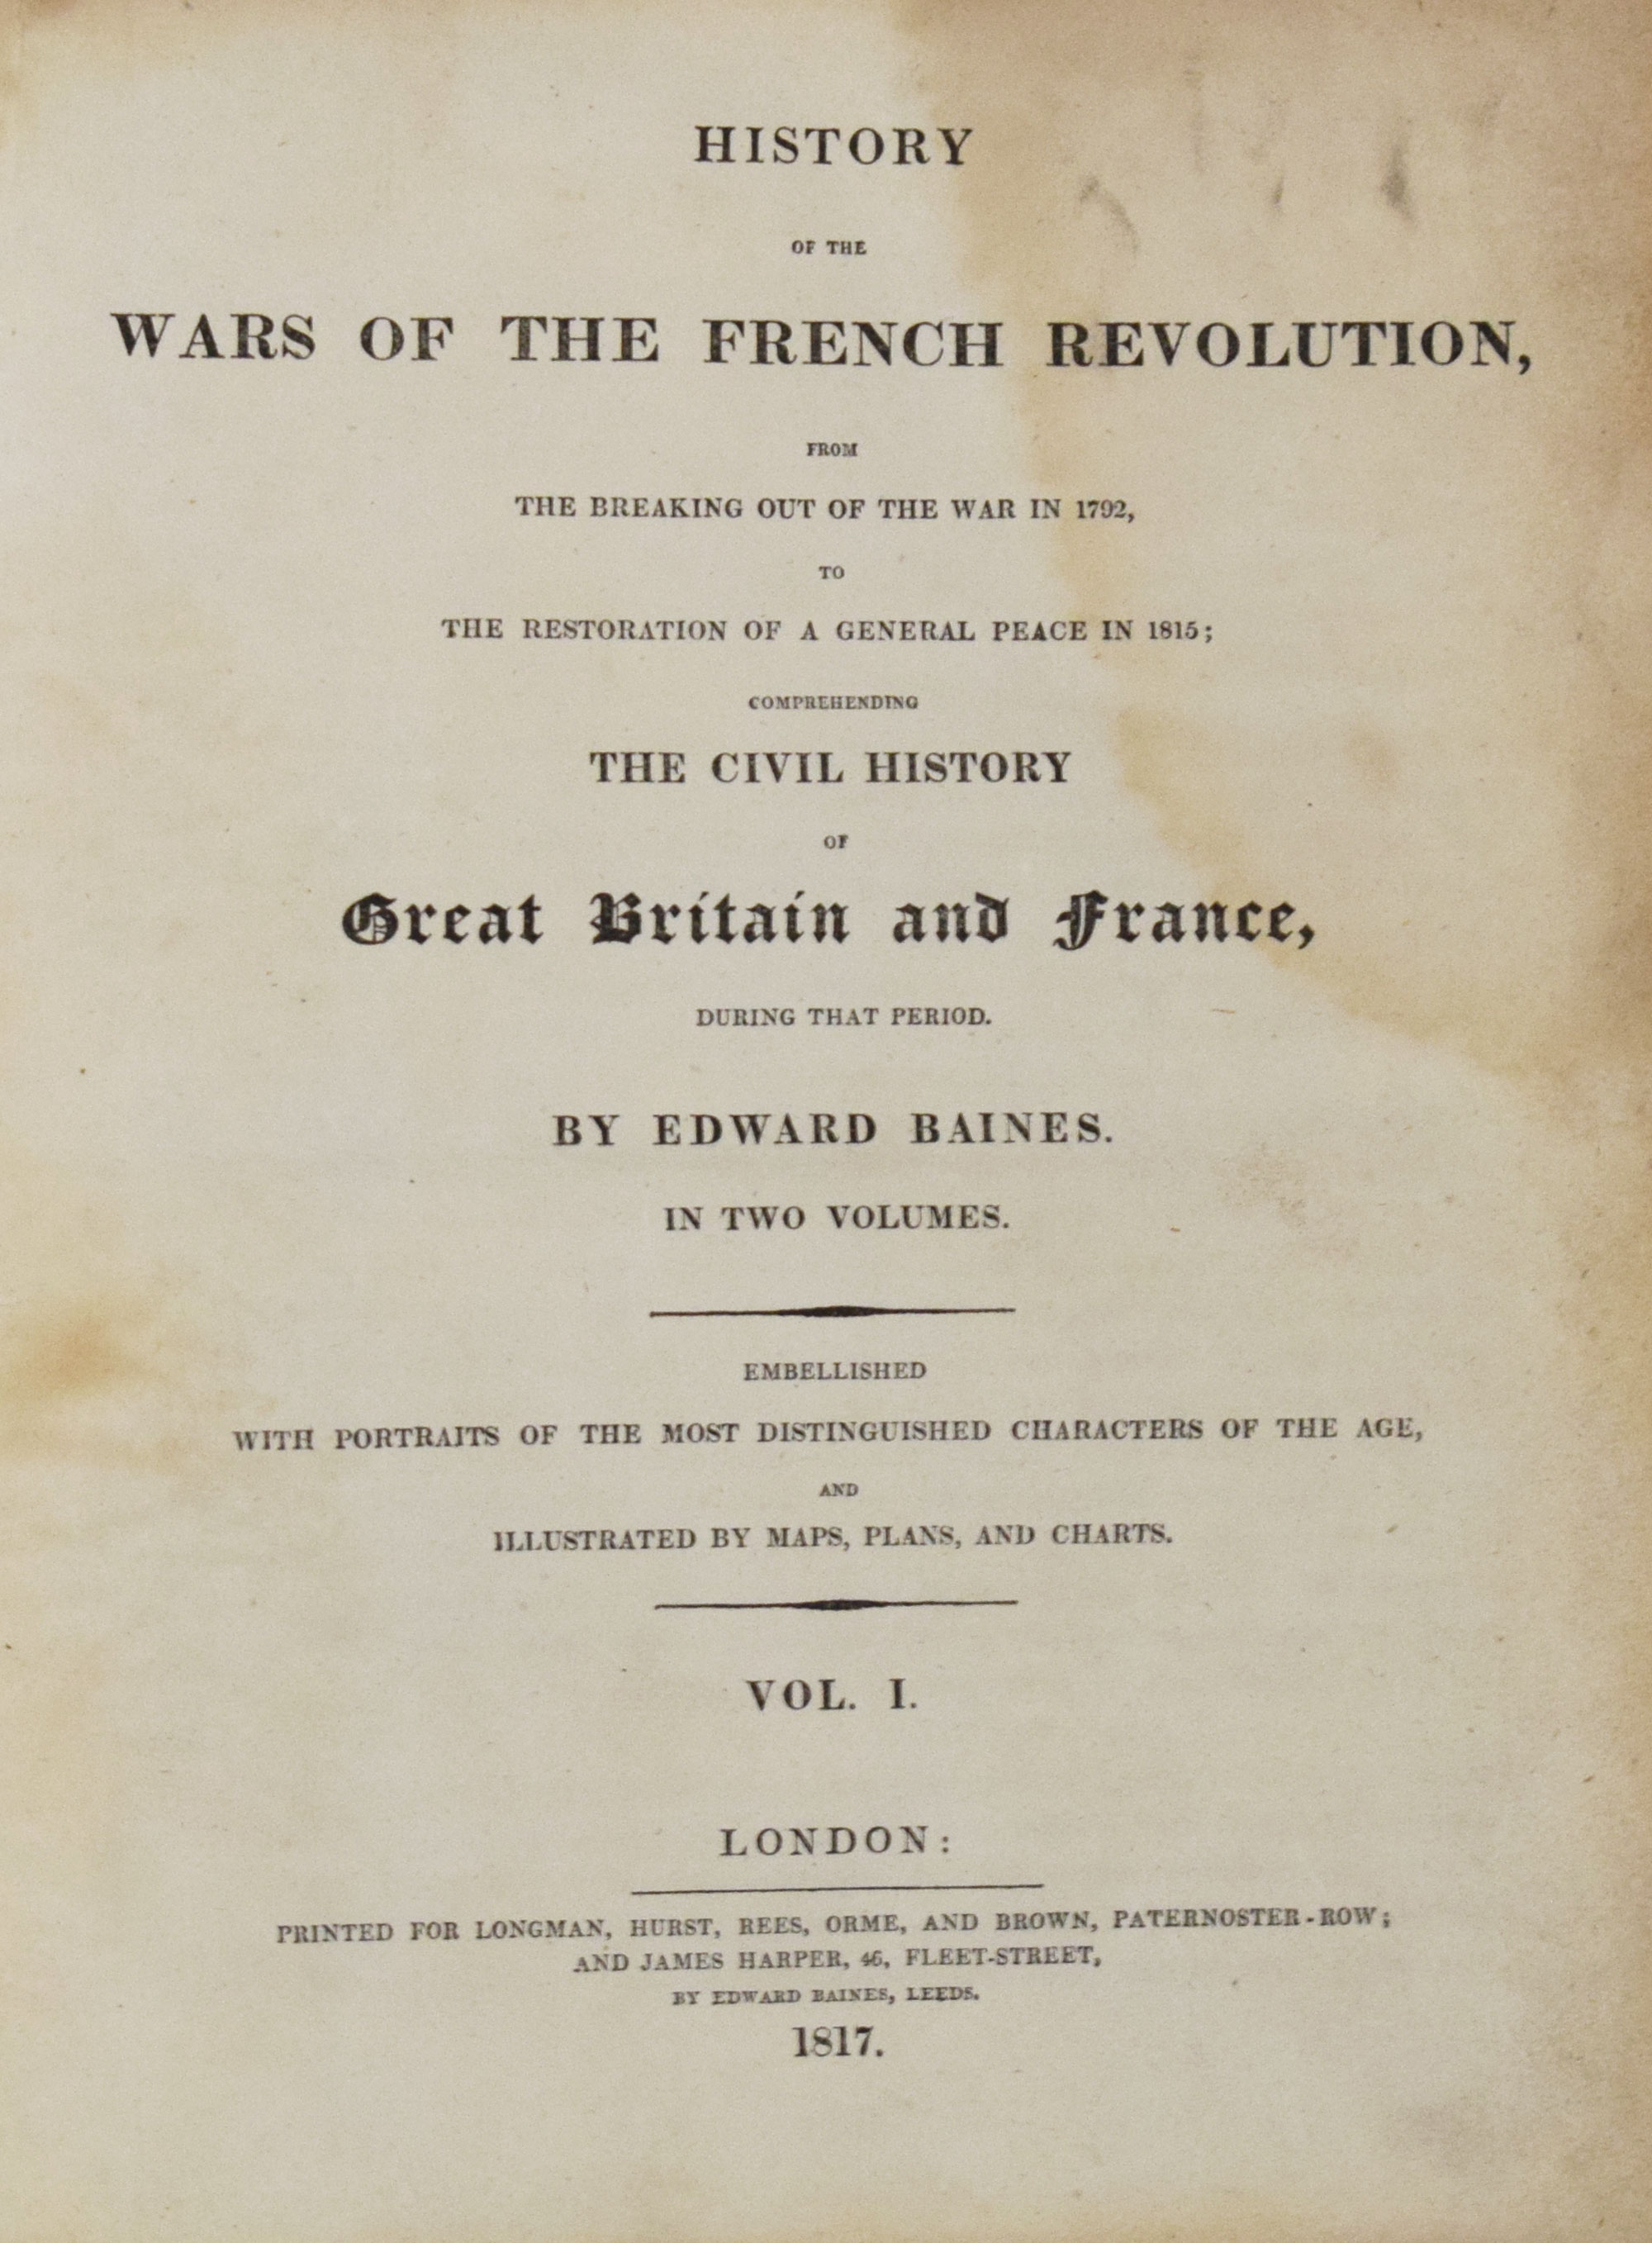 History of the Wars of the French Revolution, from the Breaking Out of the War in 1792, to the Restoration of a General Peace in 1815; Comprehending the Civil History of Great Britain and France, During that Period. Two volumes bound as one.